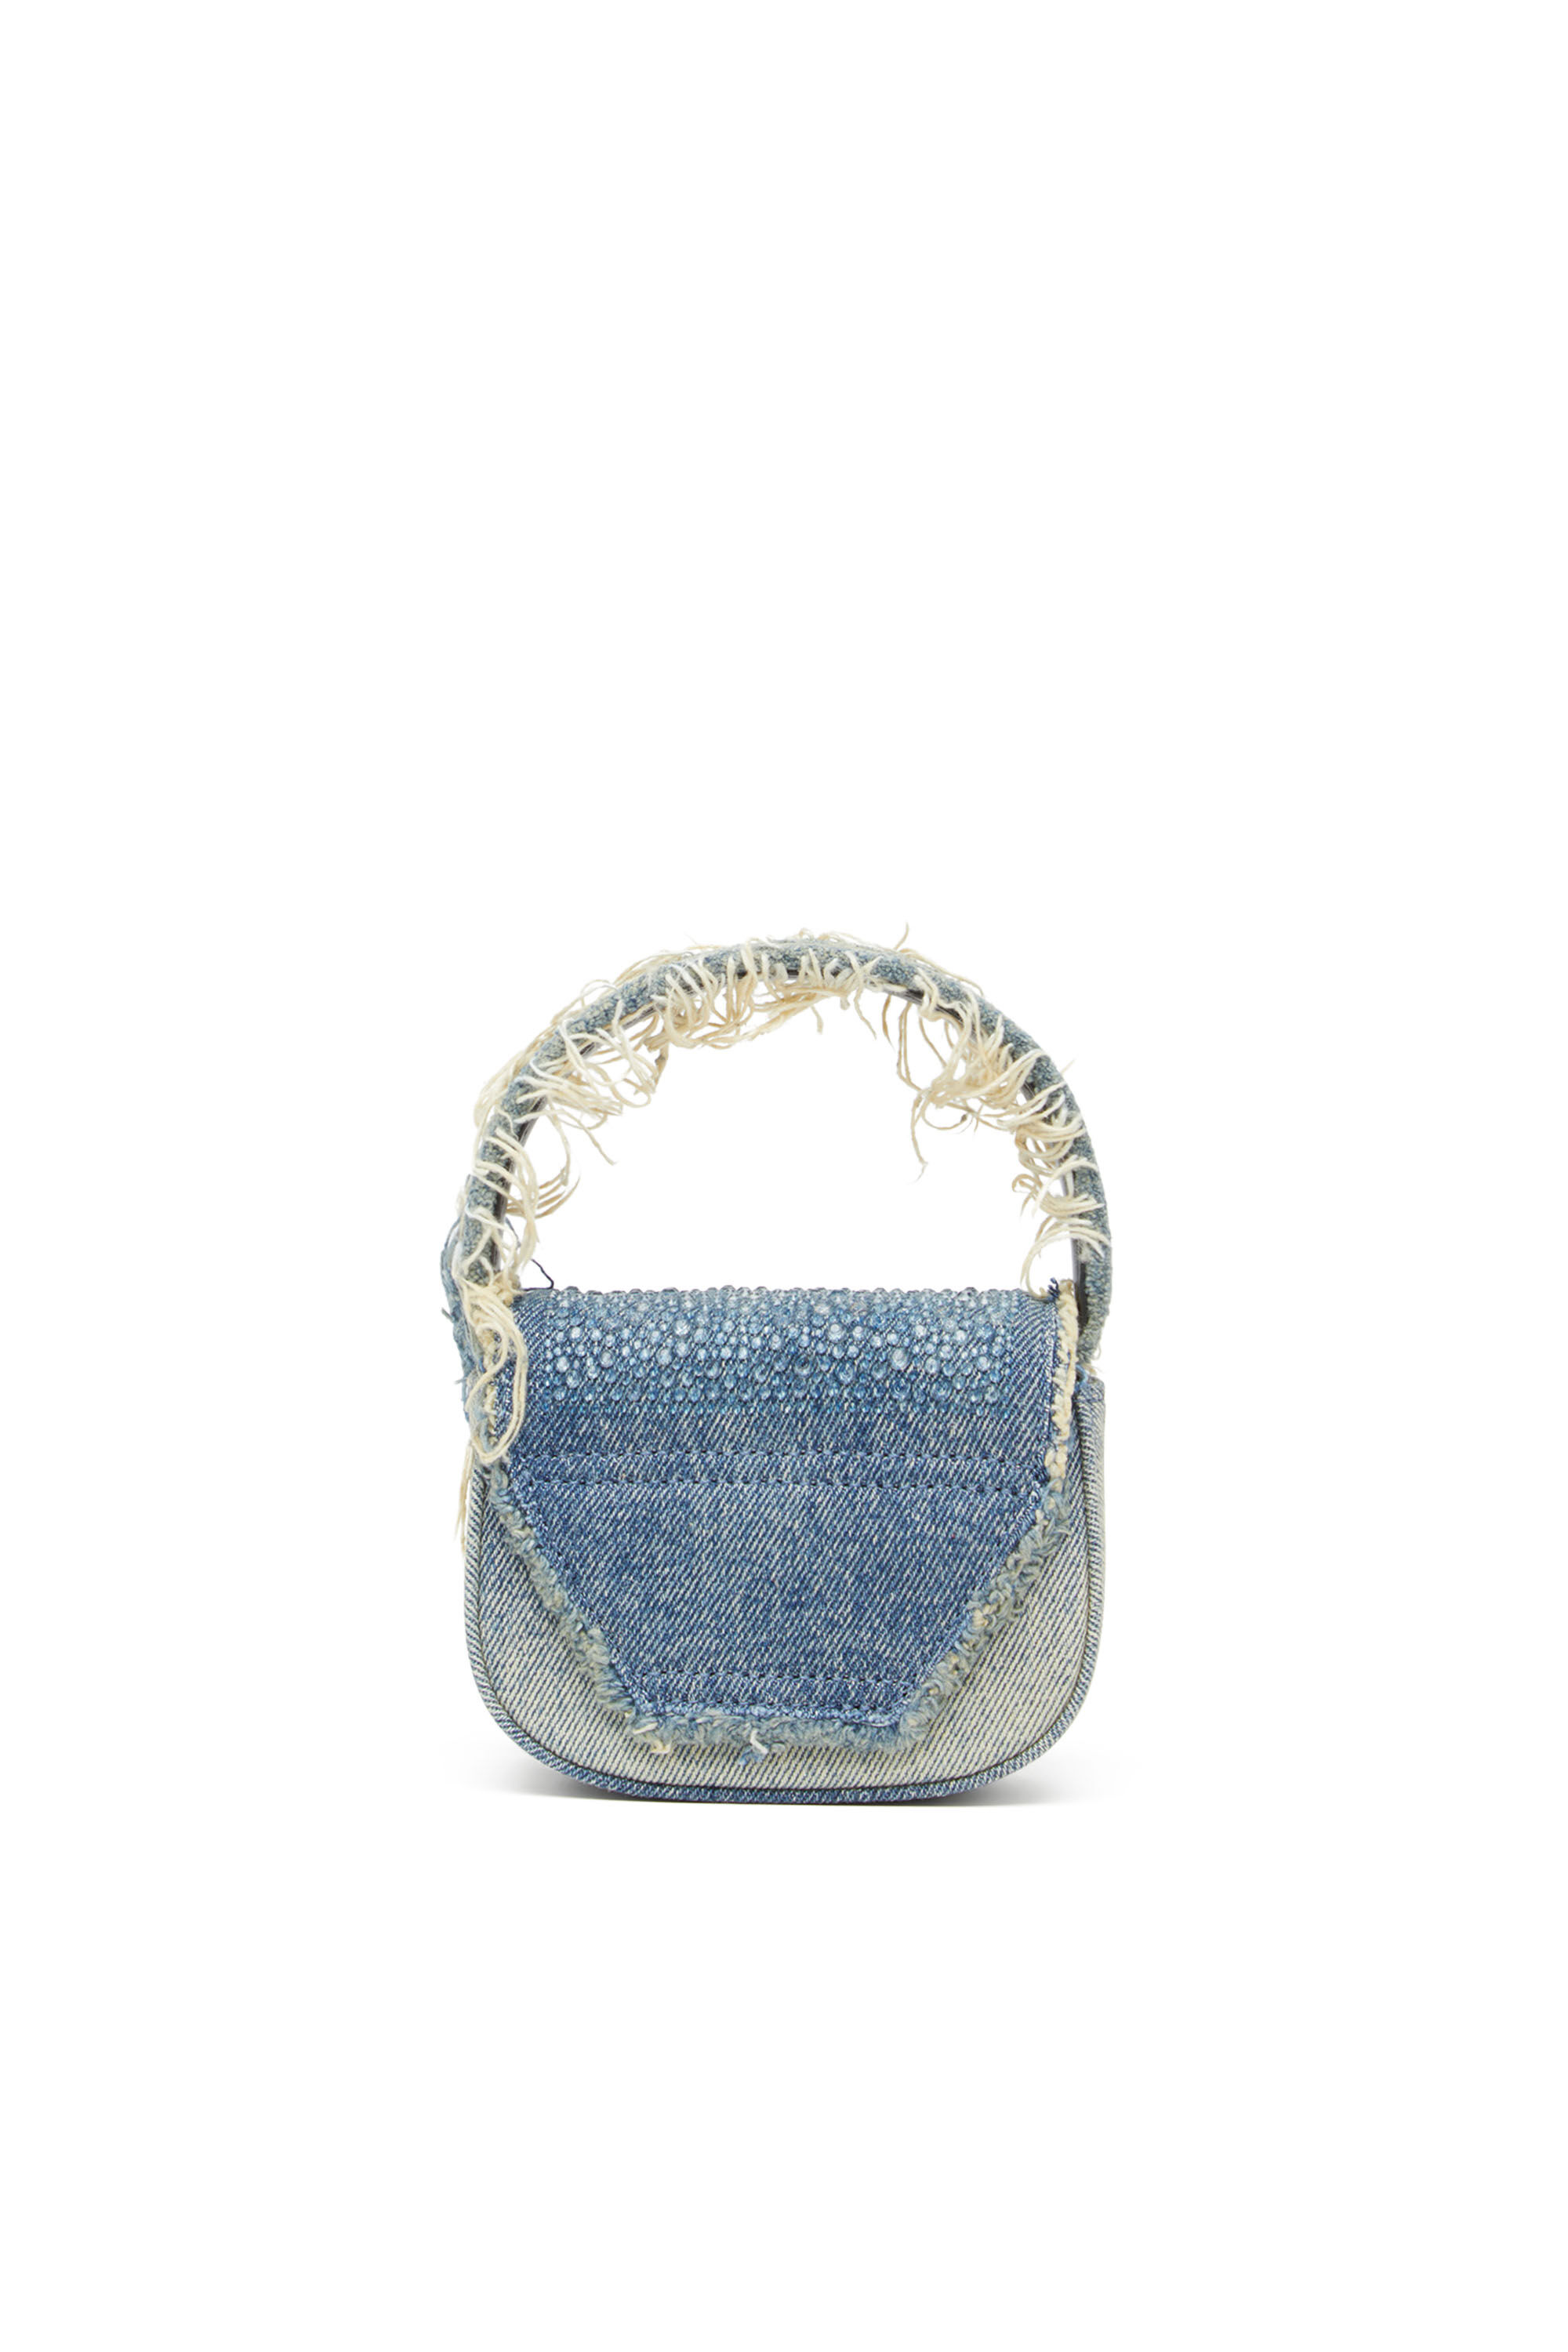 Diesel - 1DR XS, Woman 1DR XS-Iconic mini bag in denim and crystals in Blue - Image 3